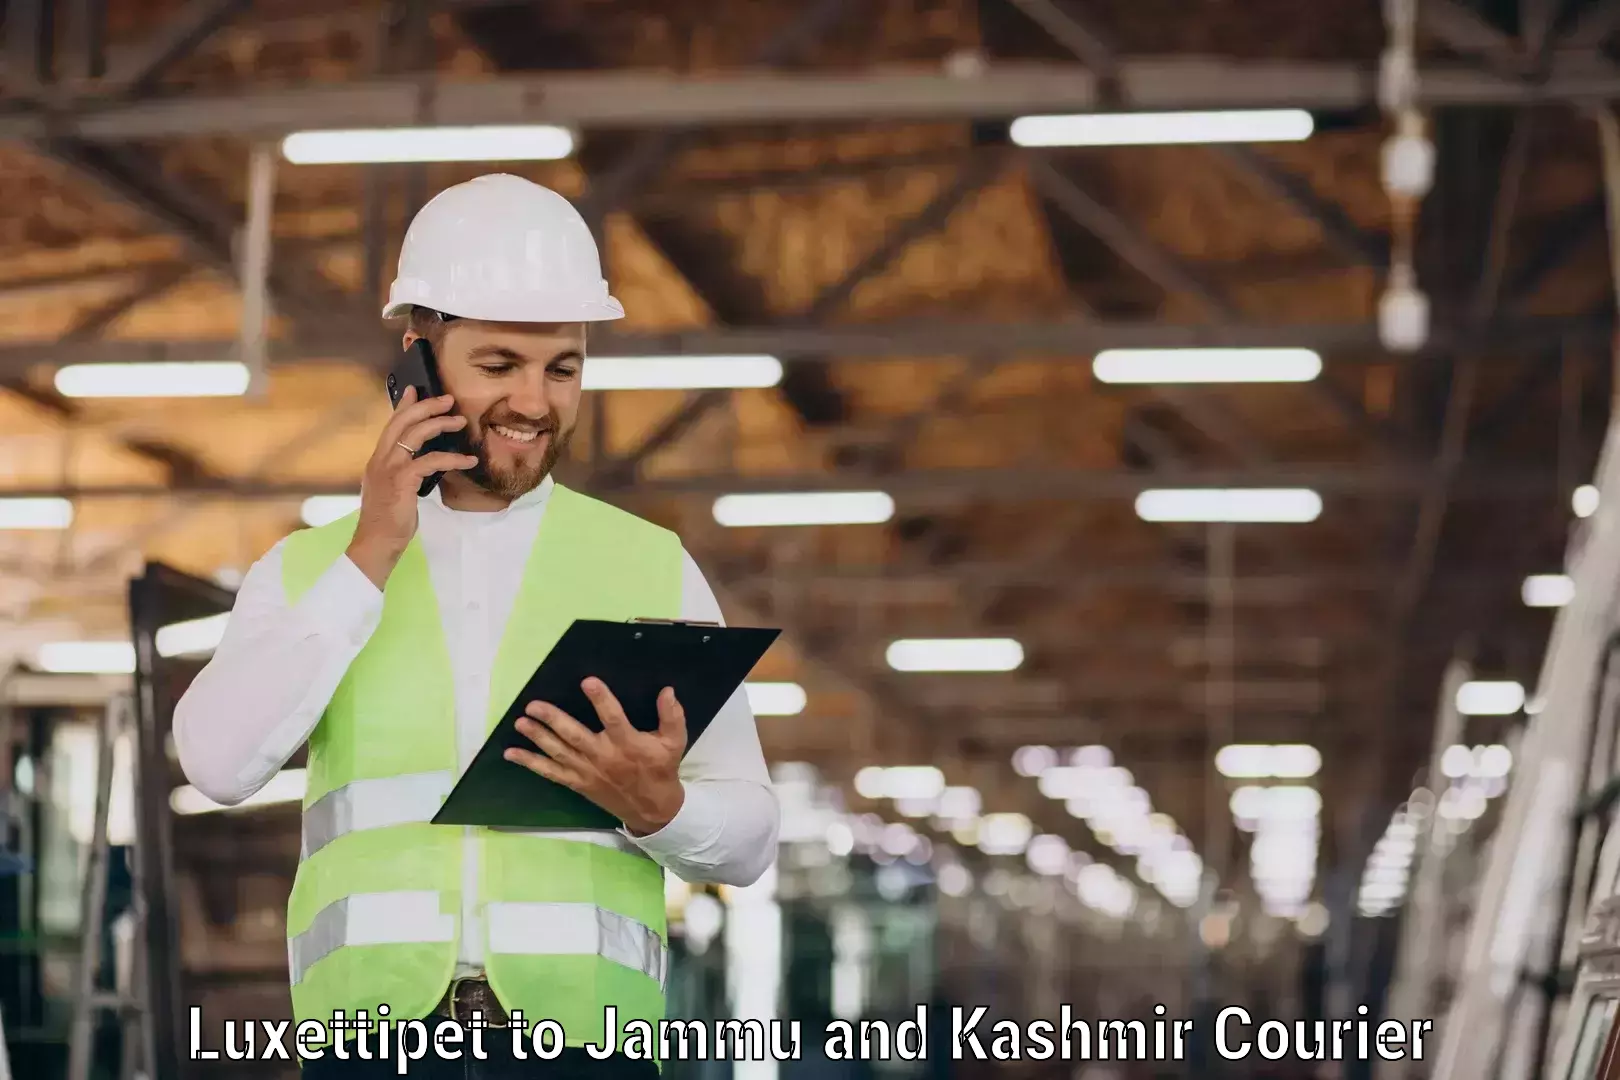 Courier service innovation Luxettipet to Kupwara